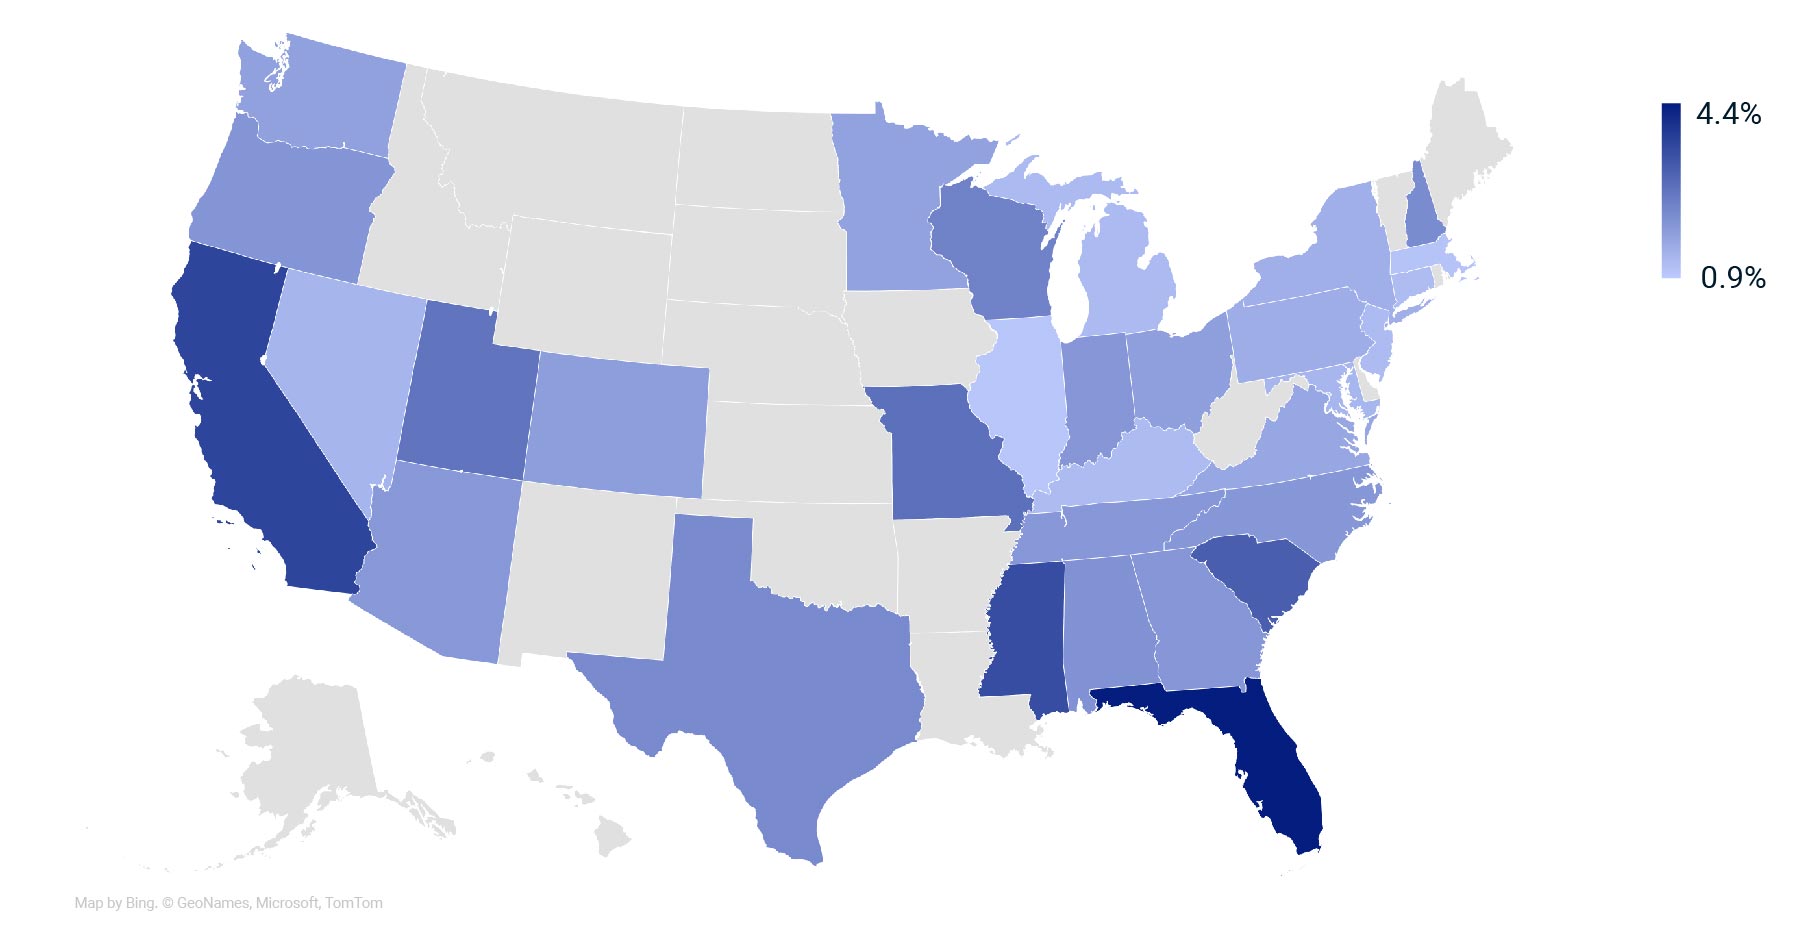 This map shows insurance costs as a share of income receivable for U.S. states, using MSCI U.S. Quarterly Property Index data. 